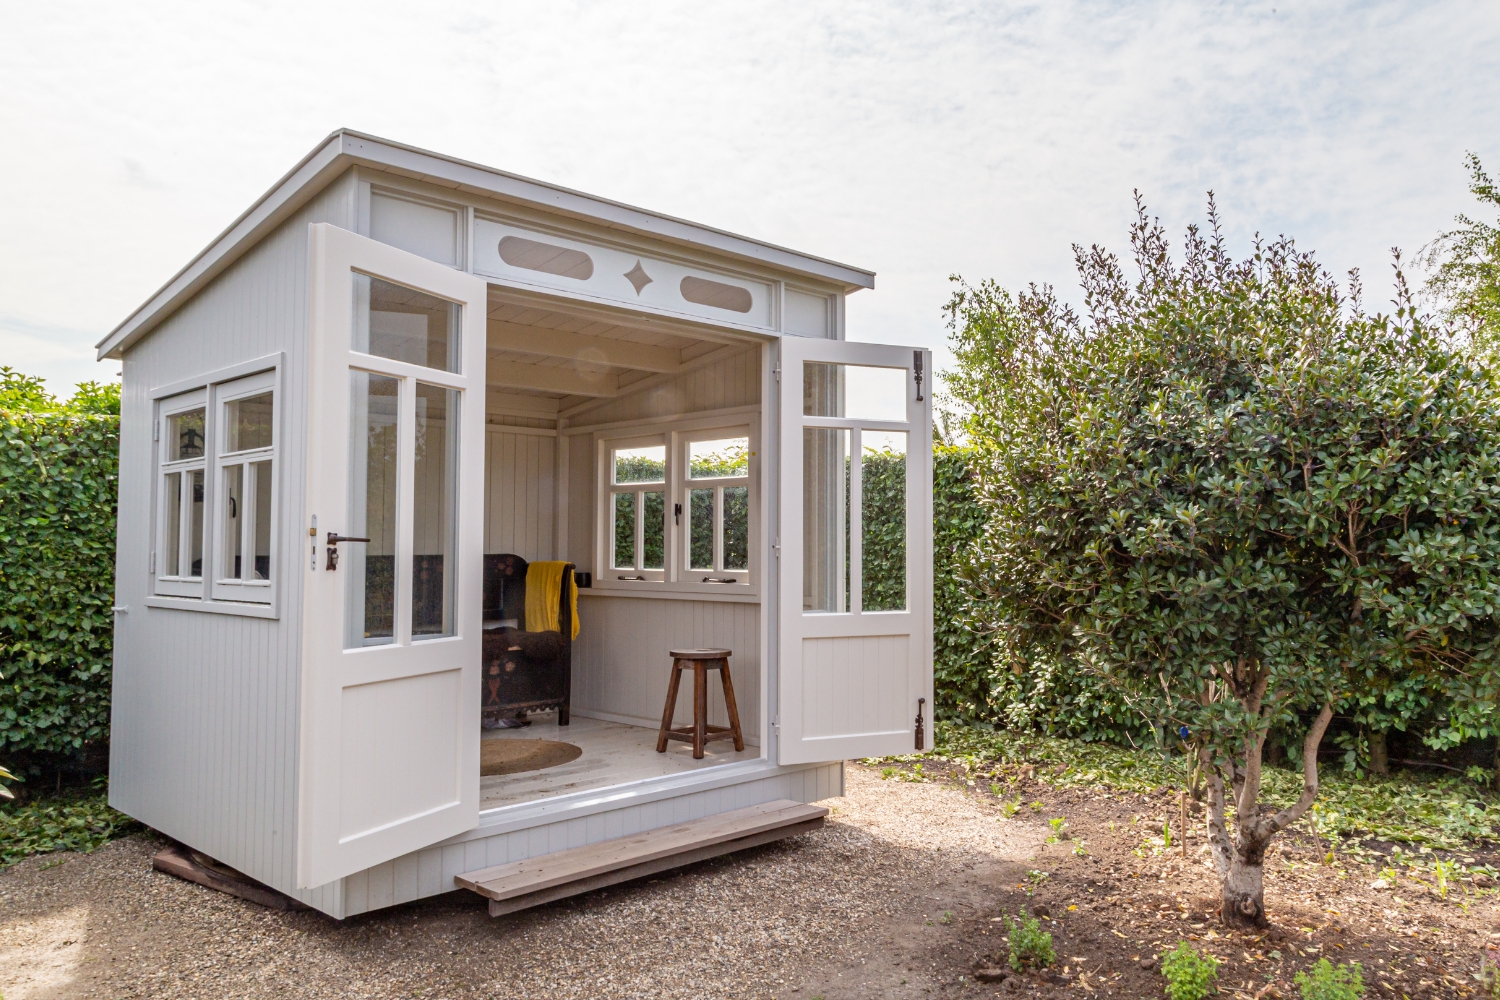 https://gemco.b-cdn.net/wp-content/uploads/how-to-transform-a-shed-into-tiny-house.jpg